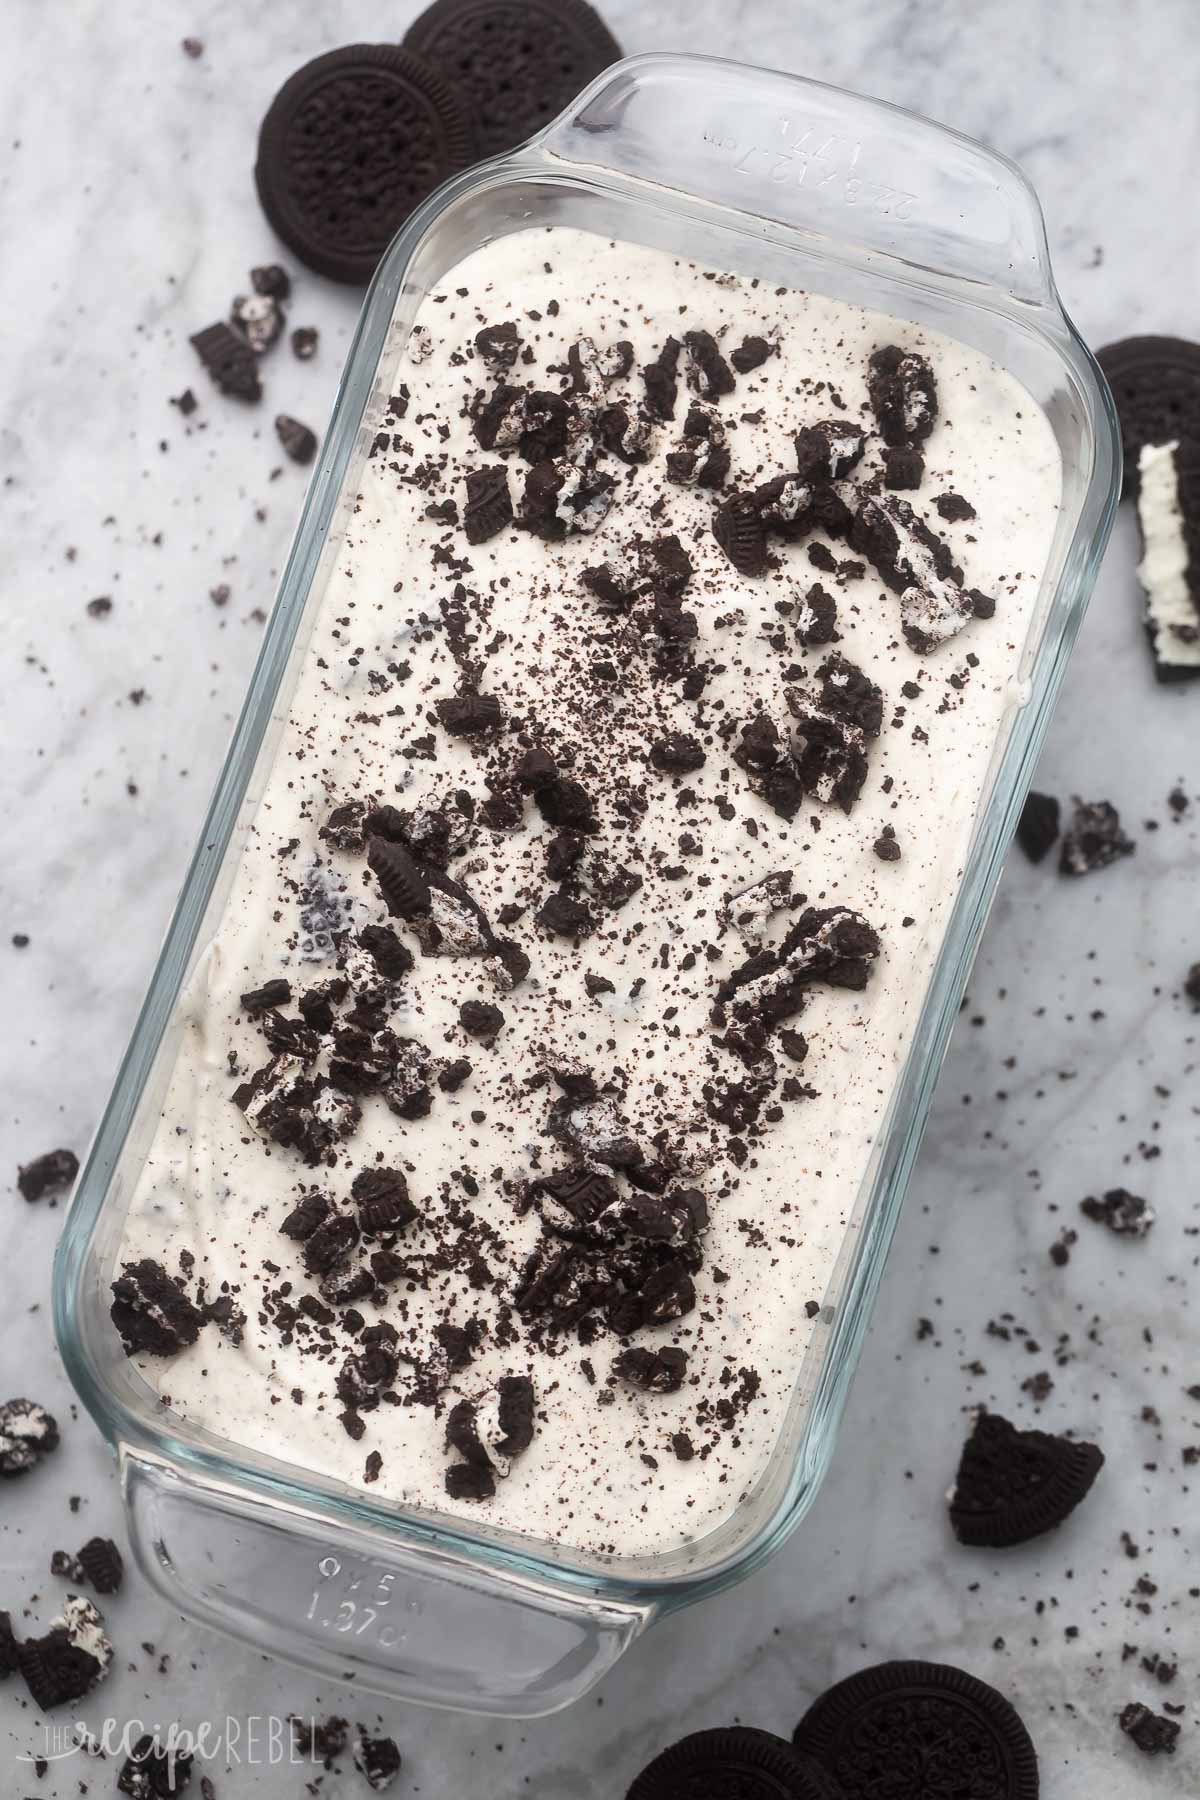 Top view of glass dish with No Churn Oreo Ice Cream in it, with Oreo pieces on top, surrounded by crushed Oreo bits on the worktop.